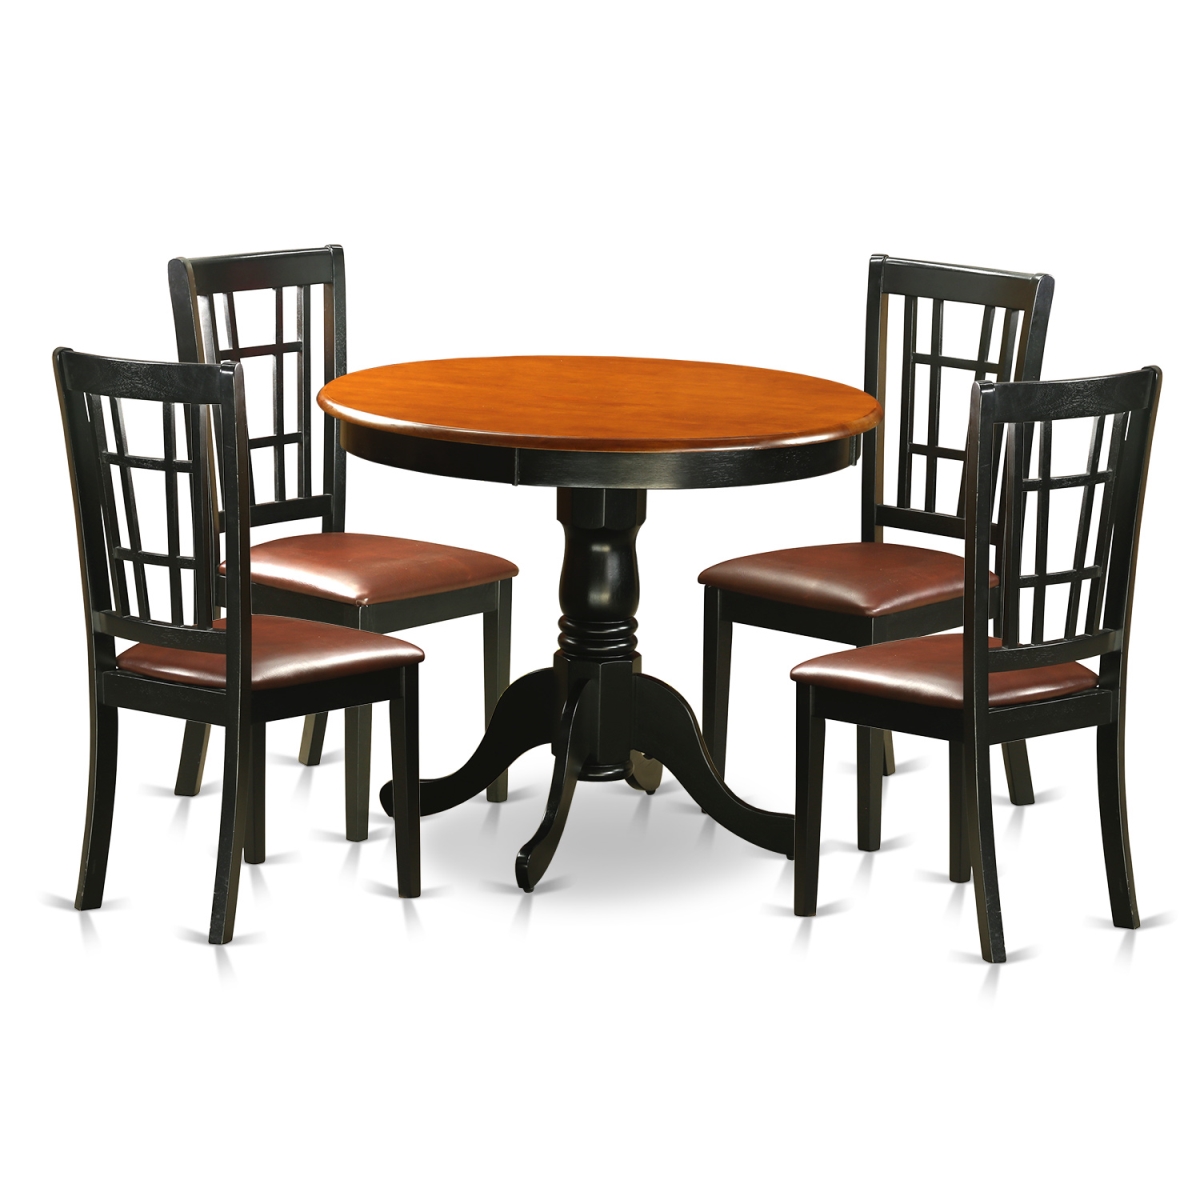 Picture of East West Furniture ANNI5-BLK-LC Dining Table with 4 Faux Leather Chairs, Black & Cherry - 5 Piece